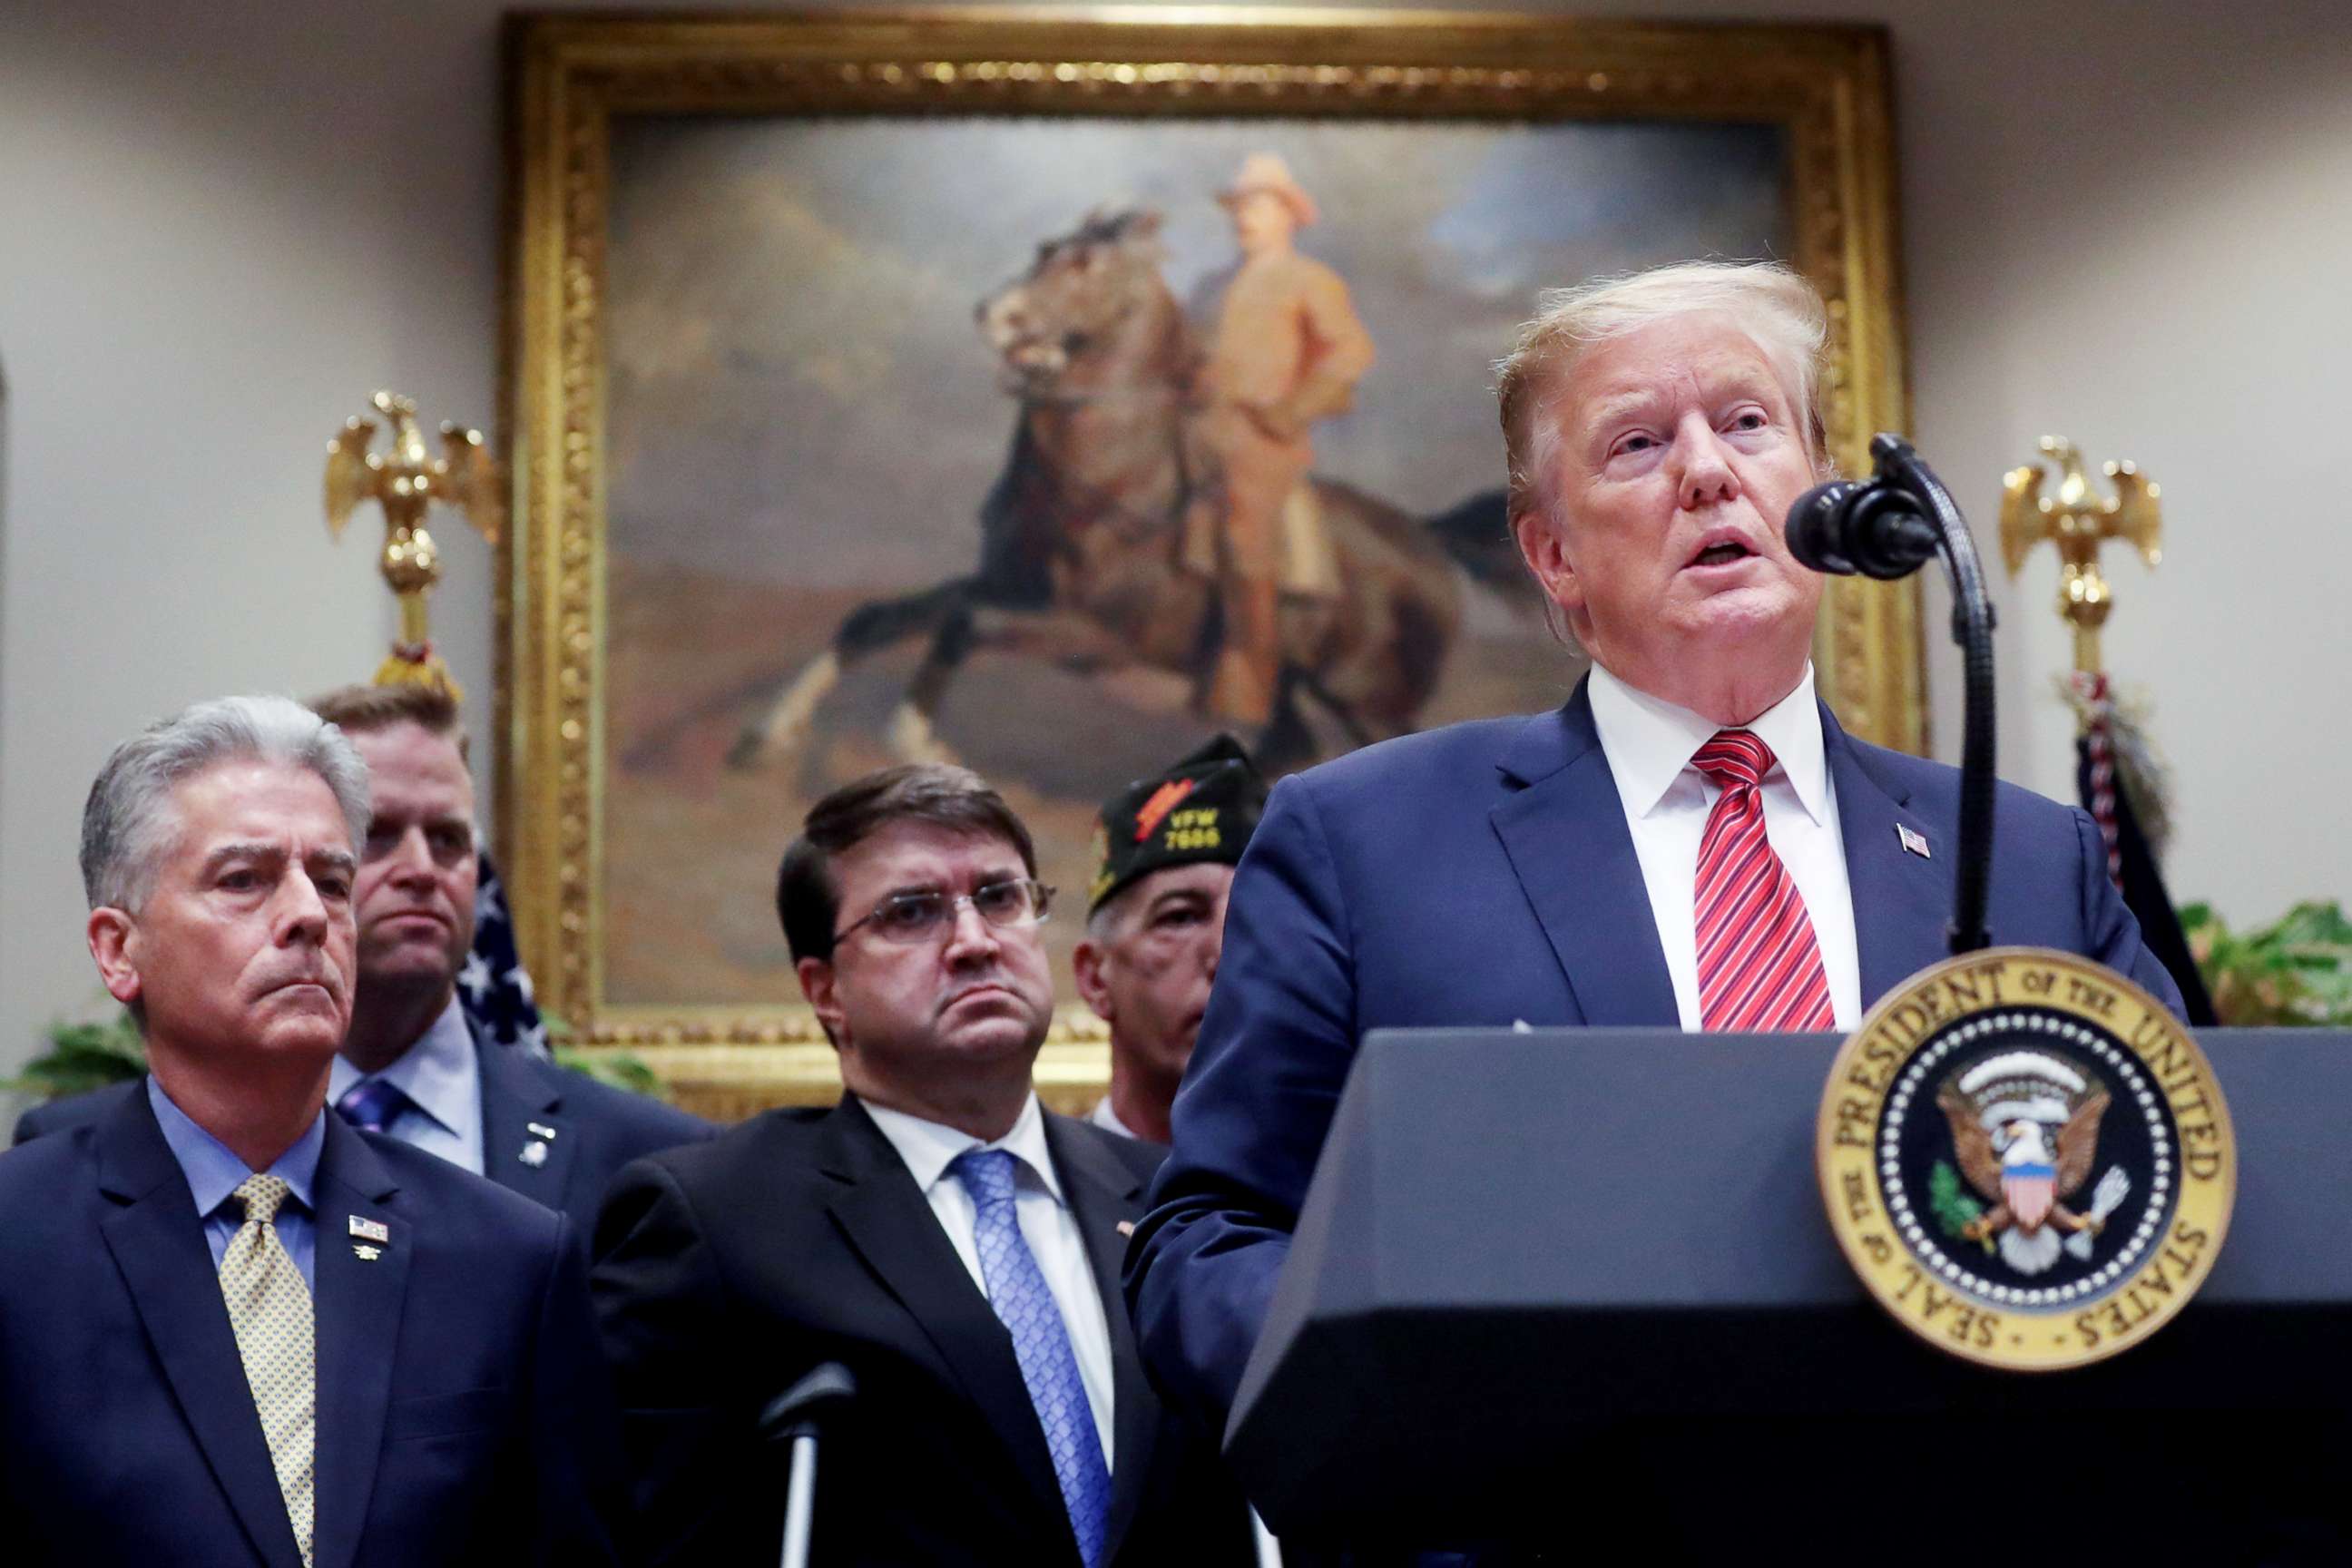 PHOTO: President Donald Trump speaks before signing an executive order on veterans suicide prevention in the Roosevelt Room at the White House, March 5, 2019.